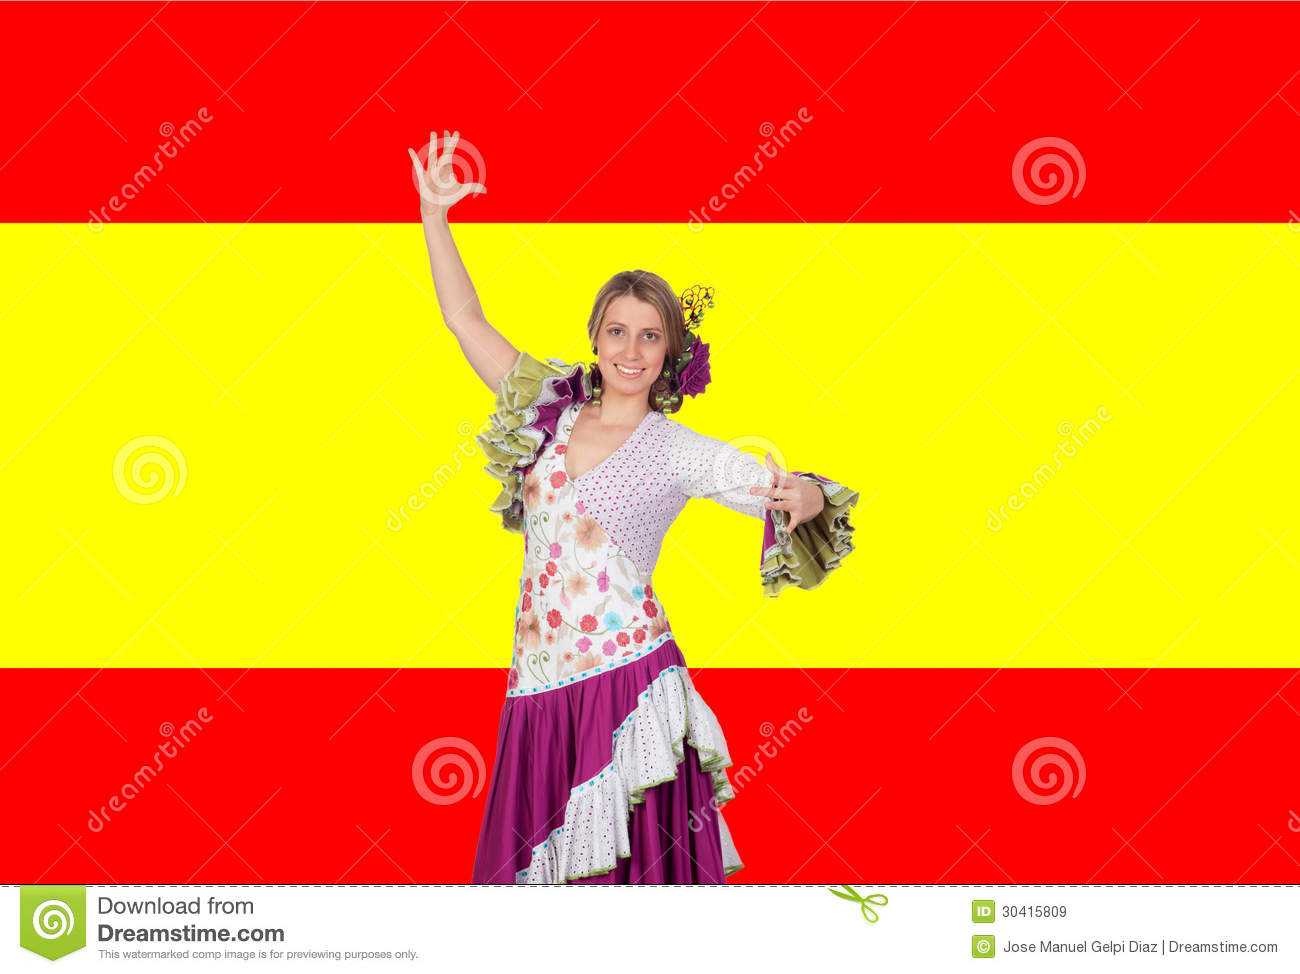 Spanish Culture Royalty Free Stock Images   Image  30415809